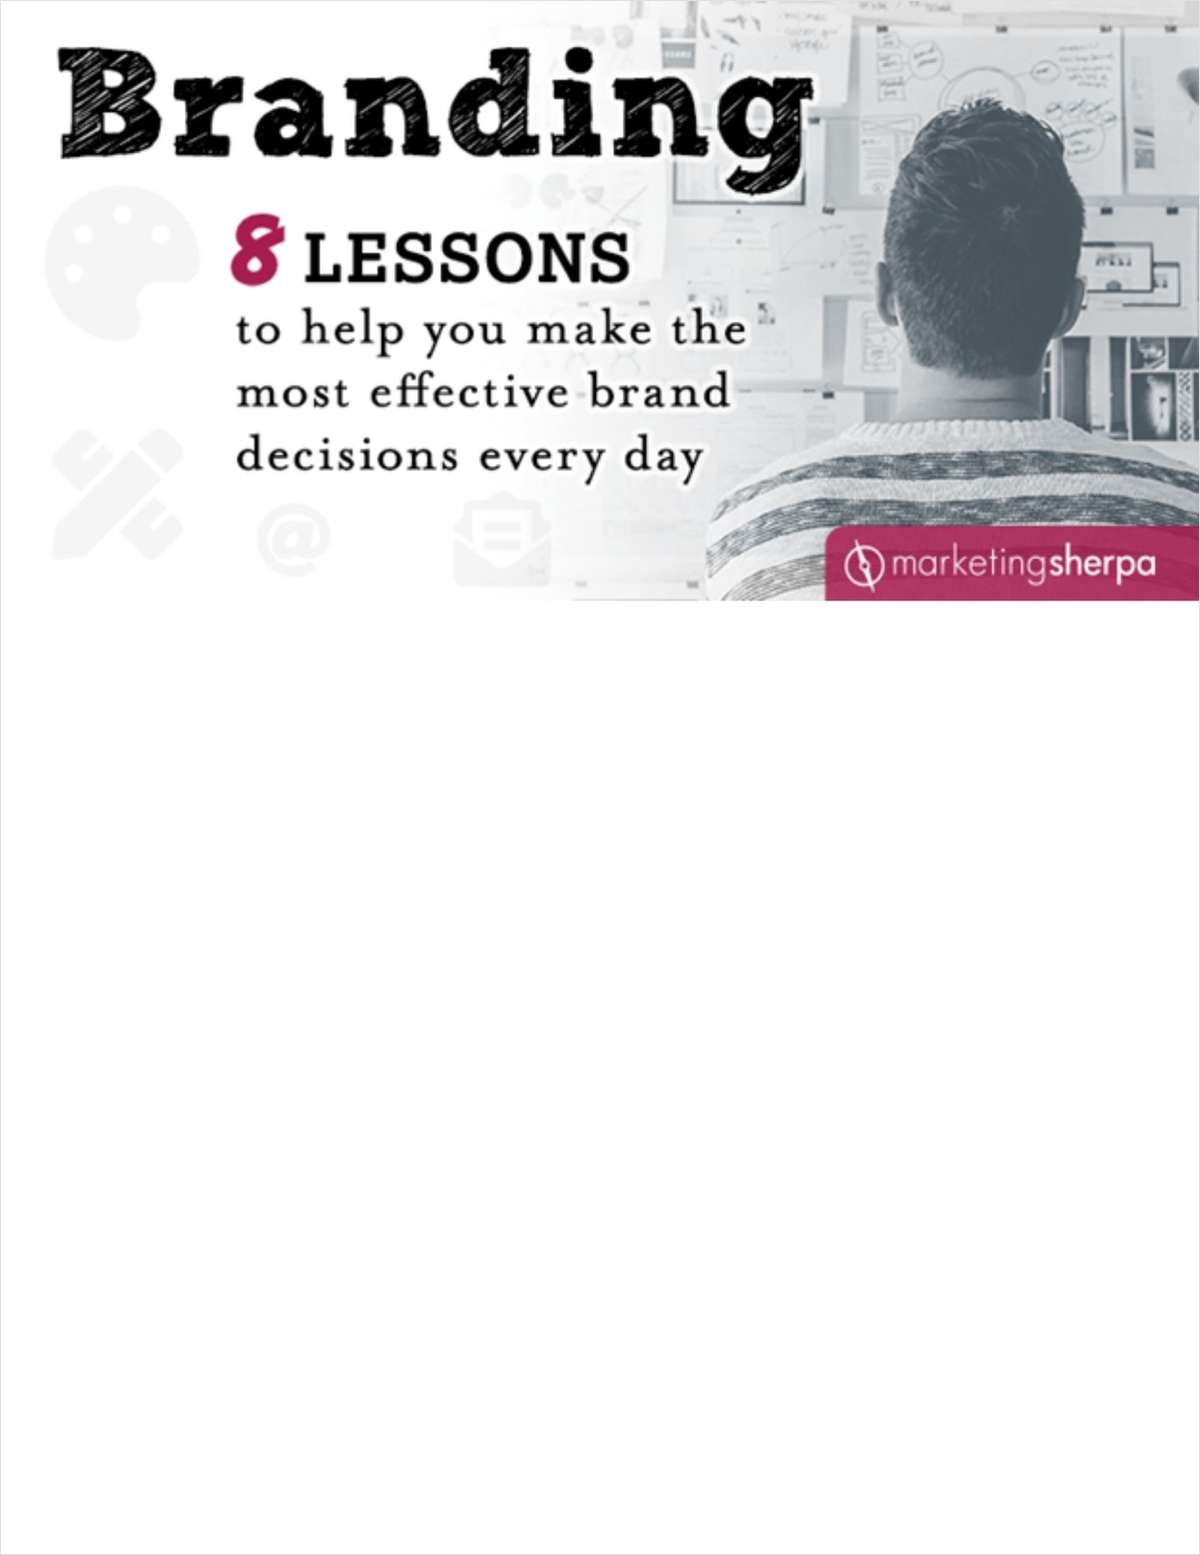 Branding: 8 Lessons to Help You Make The Most Effective Brand Decisions Every Day